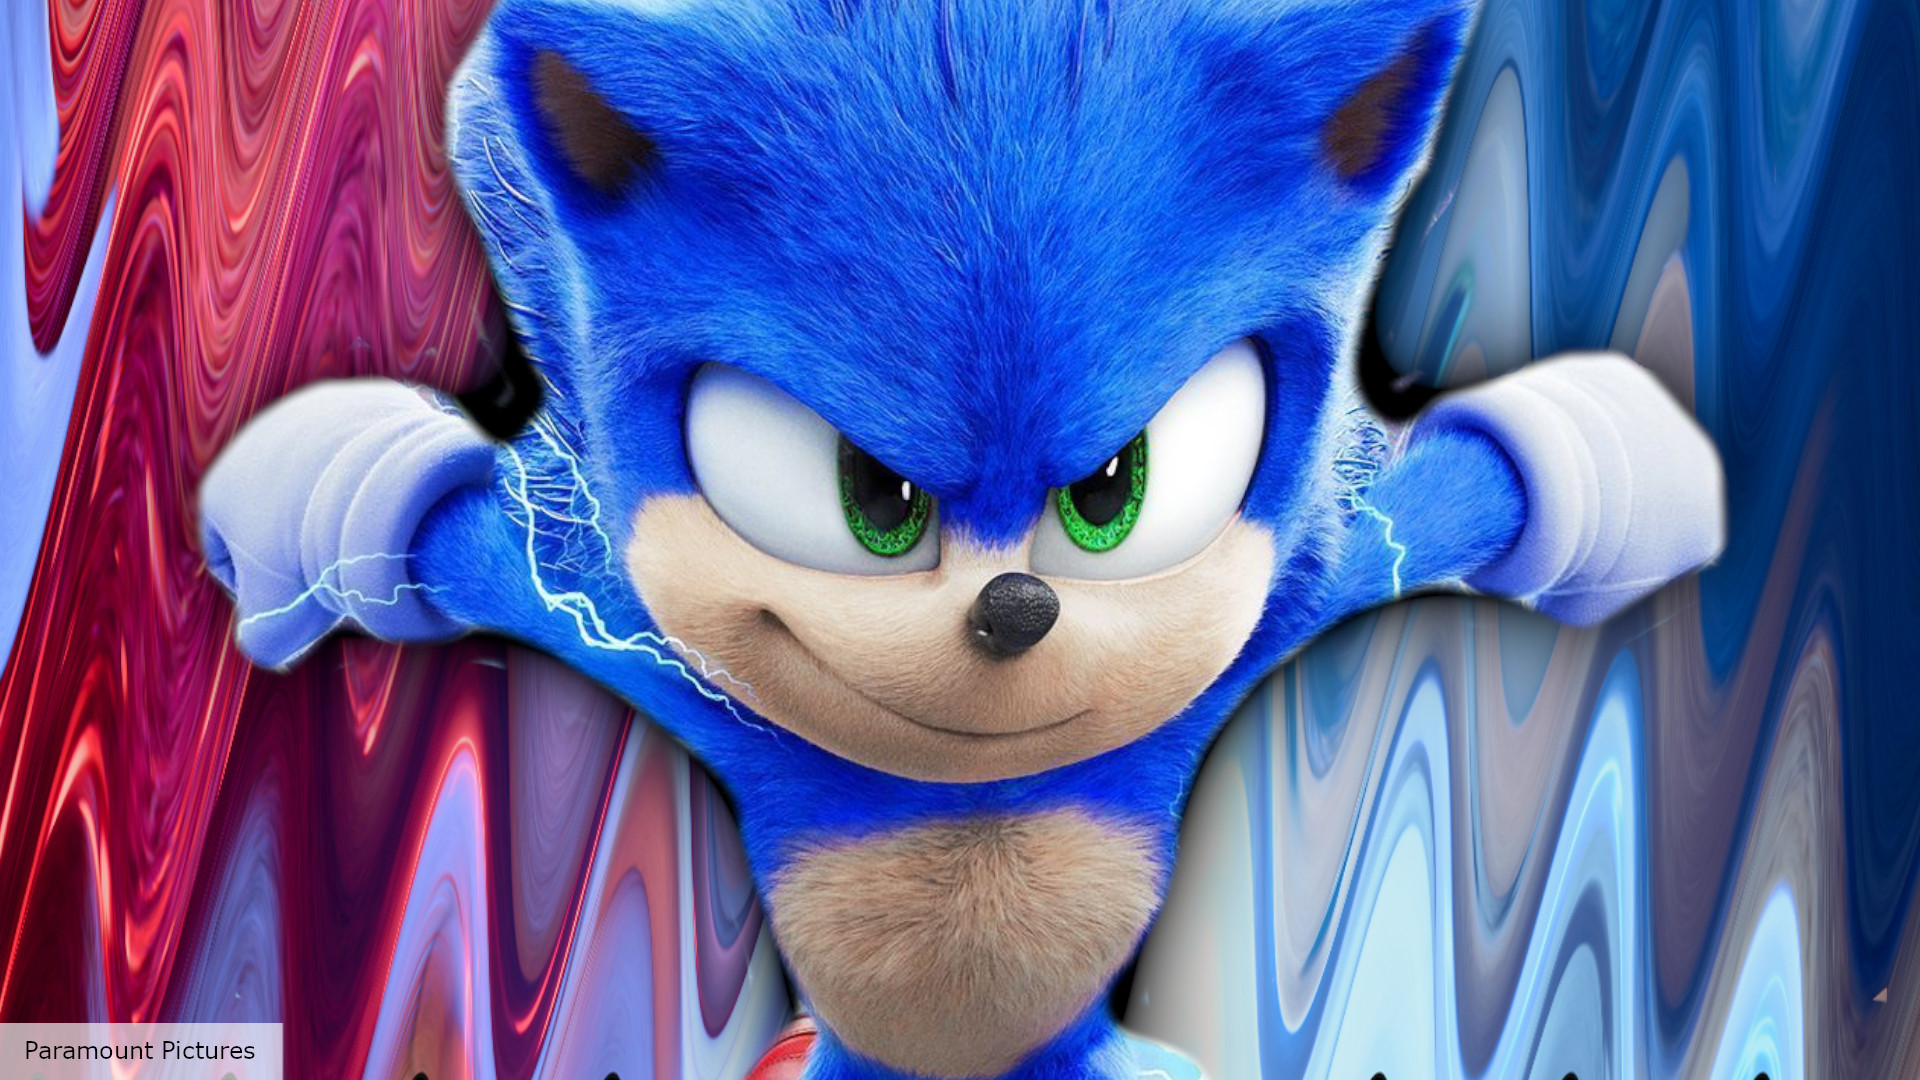 Sonic the Hedgehog 3 production start date confirms the beginning of  another adventure for the Blue Blur